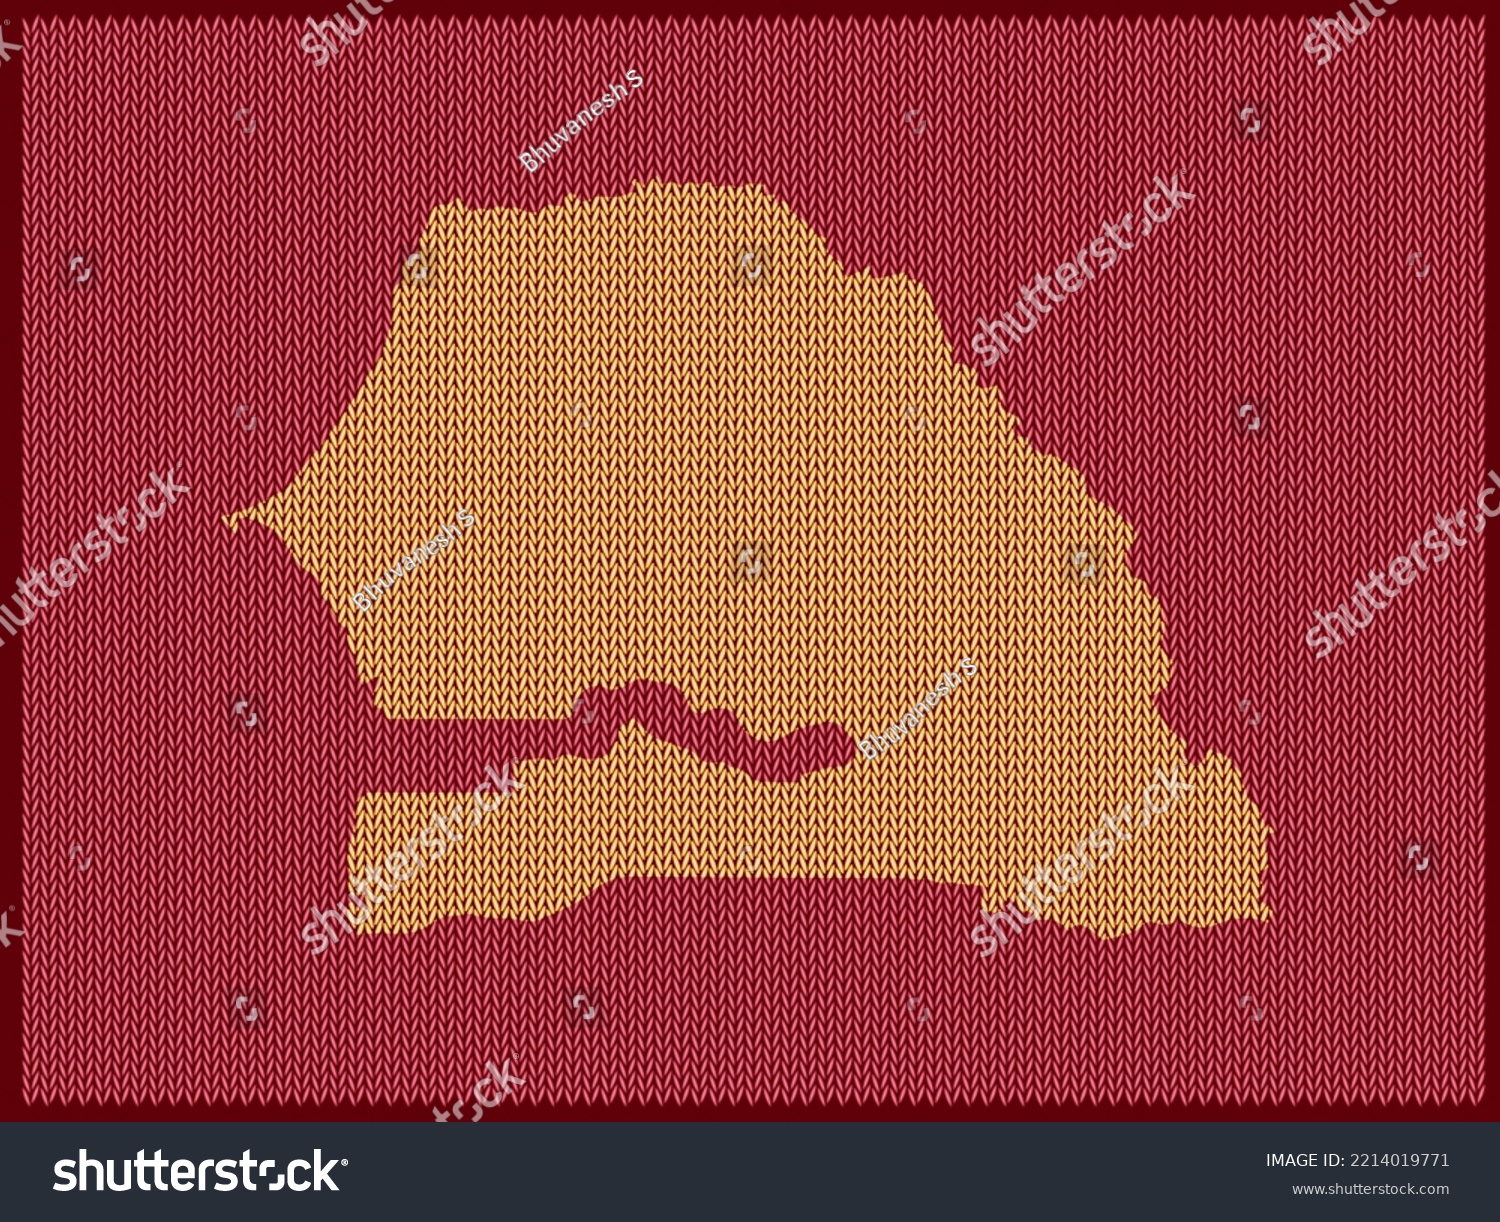 Knitting pattern map of Country Senegal Isolated on Red Background - vector illustration #2214019771